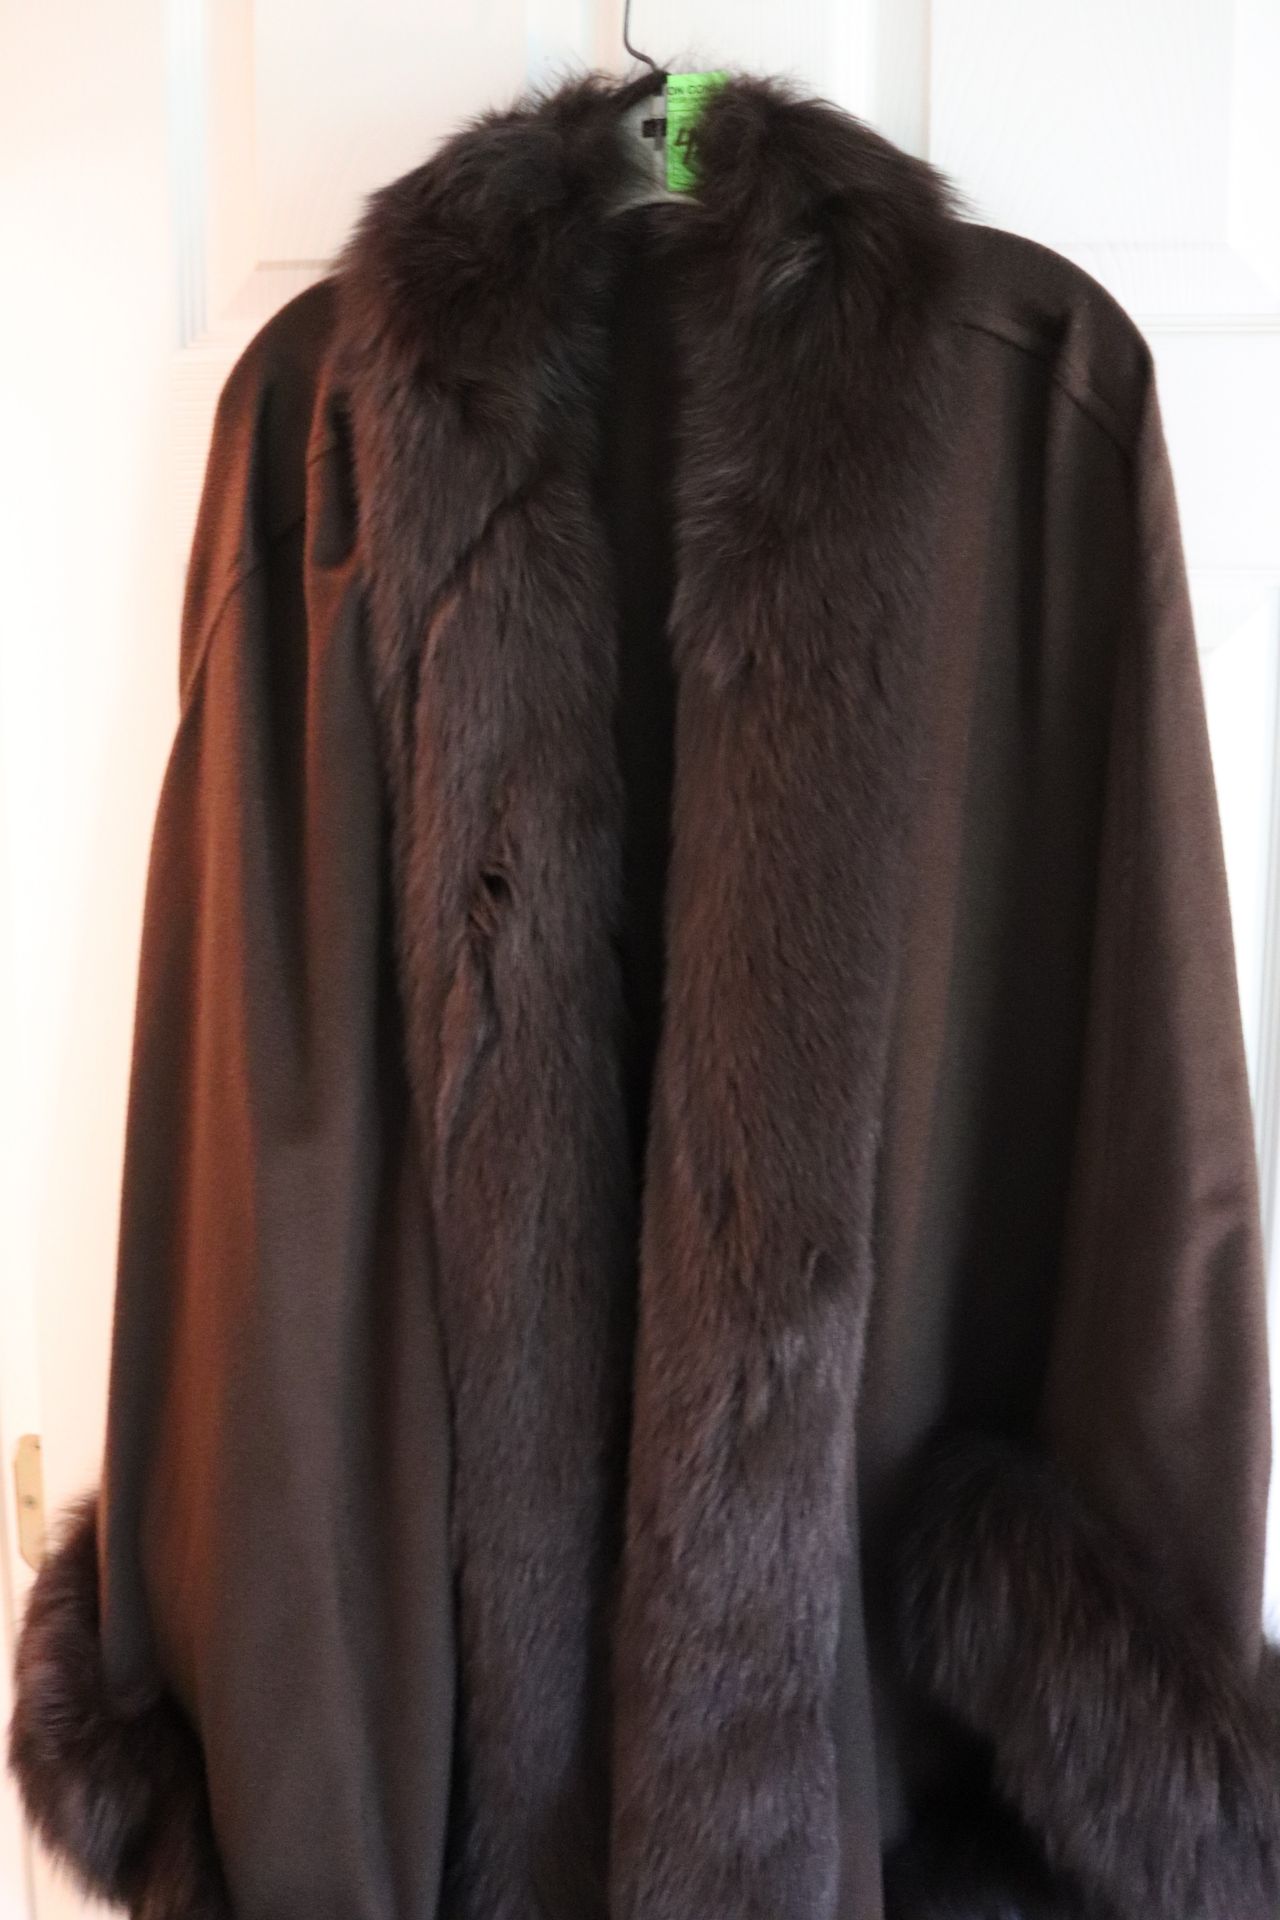 Fur trimmed jacket, unknown maker and size